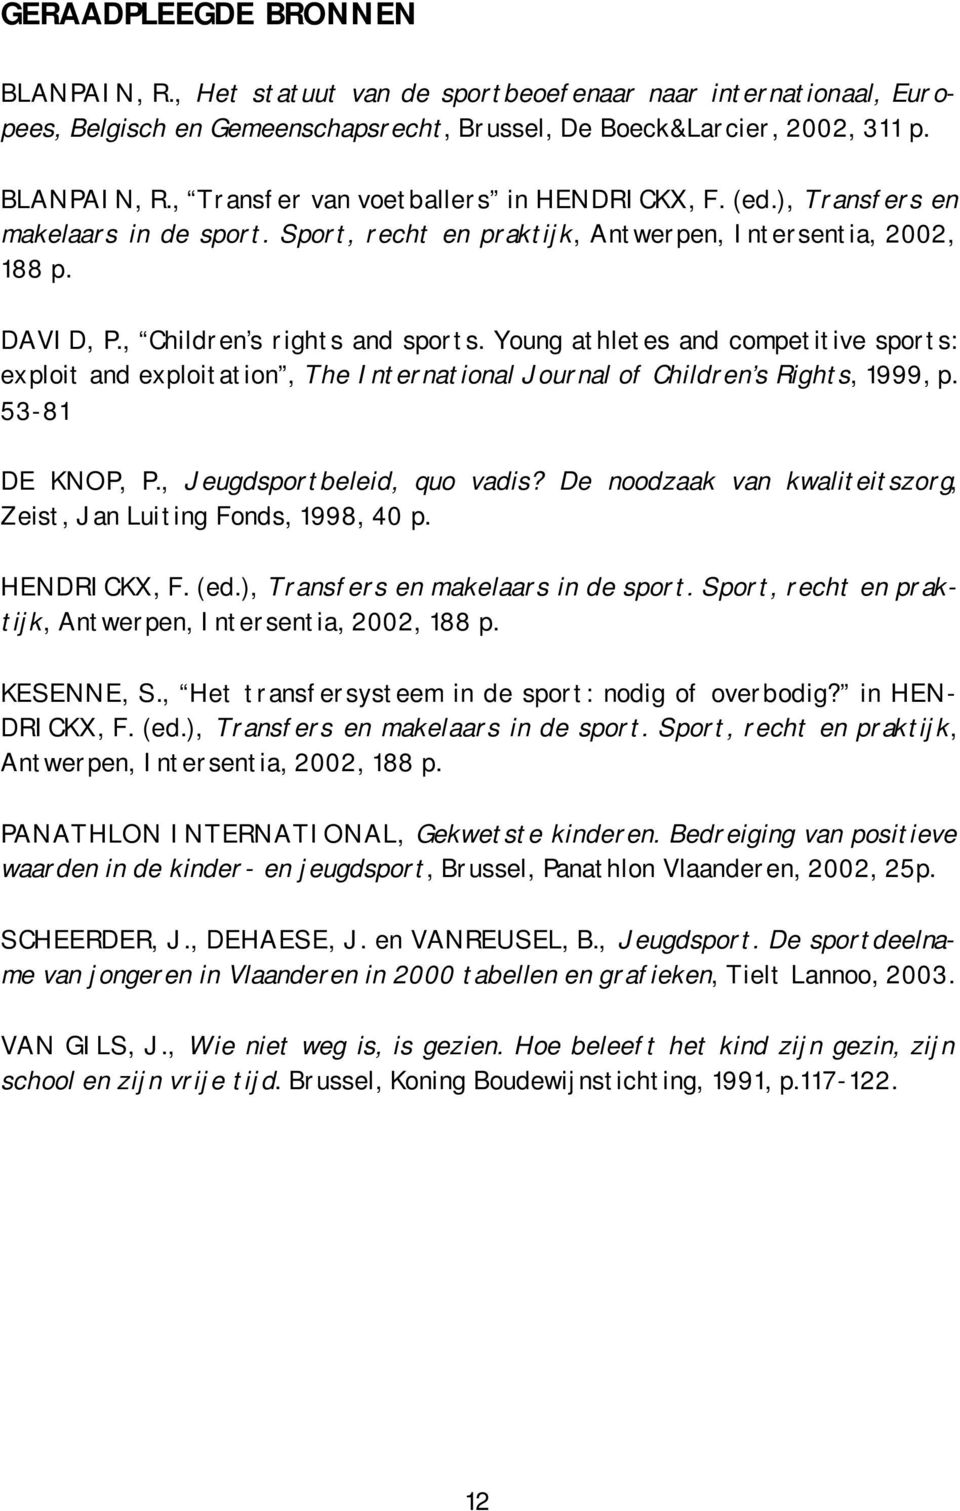 Young athletes and competitive sports: exploit and exploitation, The International Journal of Children s Rights, 1999, p. 53-81 DE KNOP, P., Jeugdsportbeleid, quo vadis?